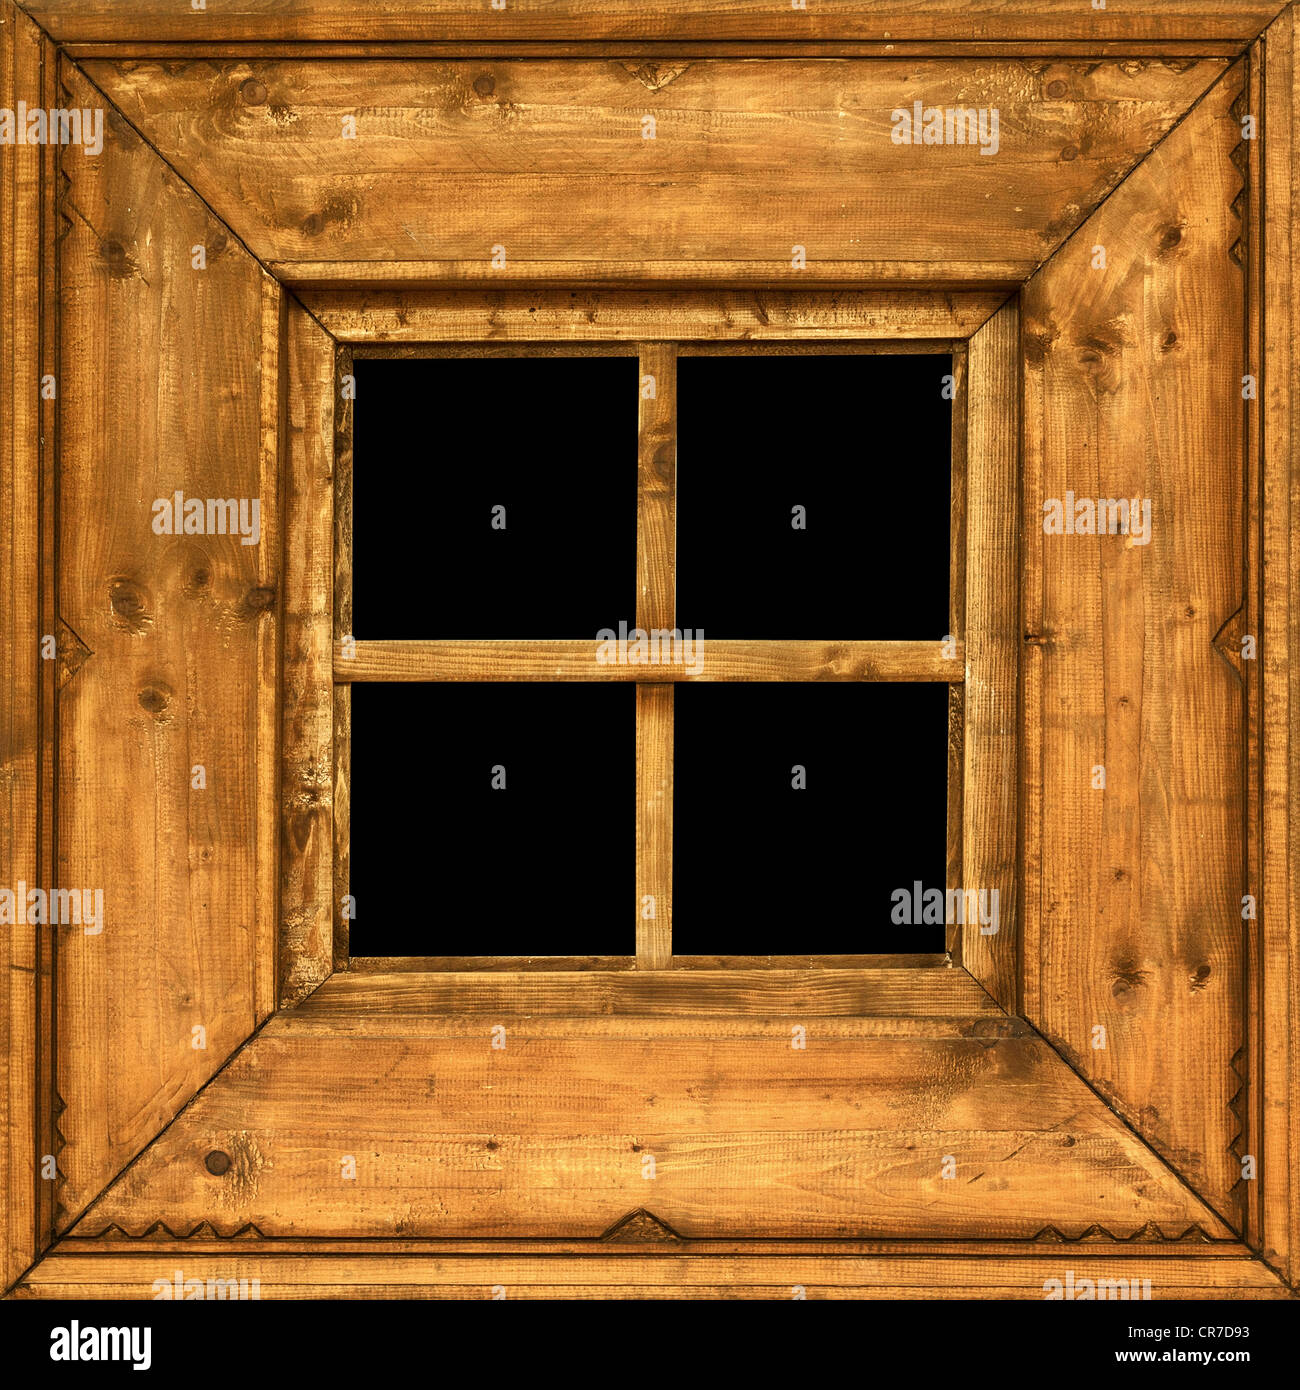 An old square wooden rural window frame Stock Photo